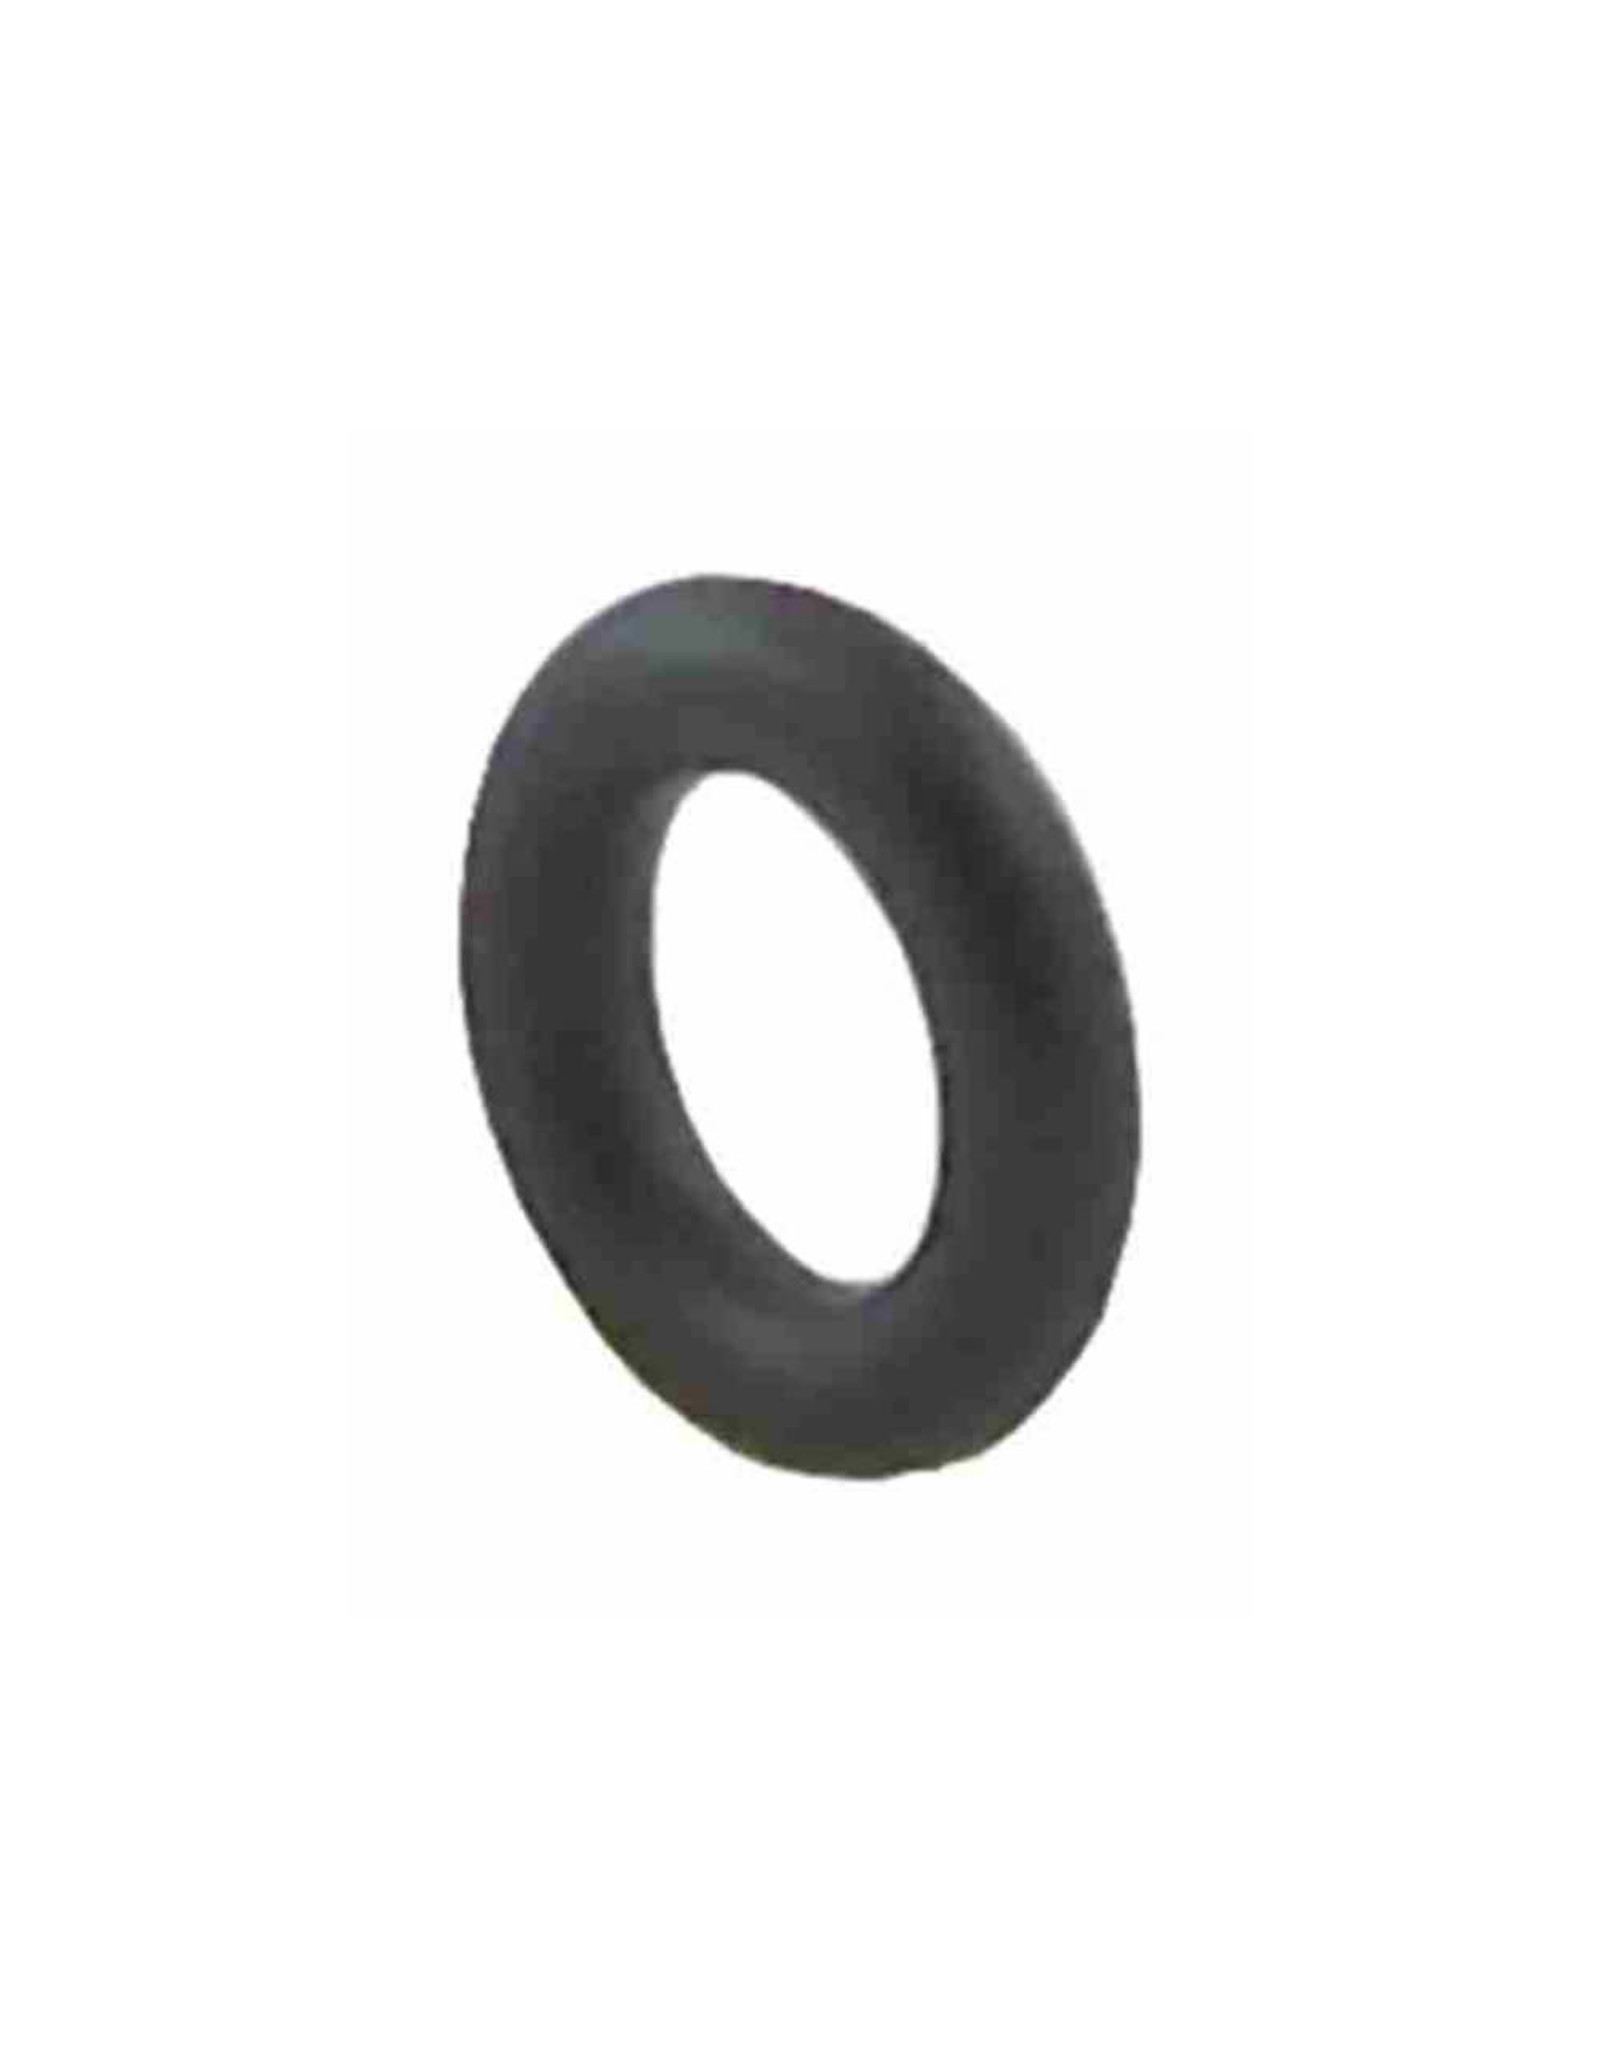 O Ring (Lever Seat/Front Seal) Perl